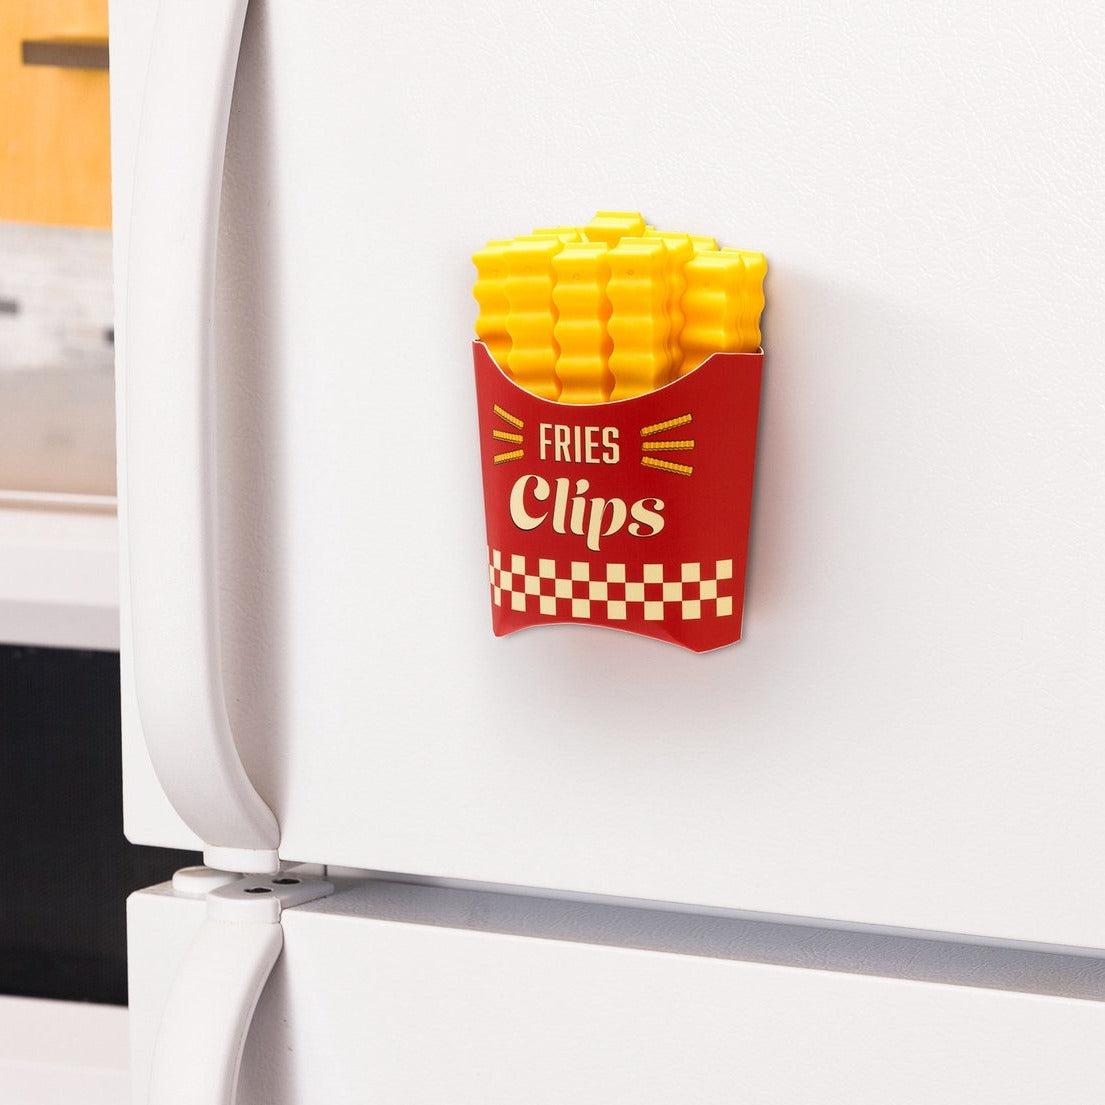 Fresh-keeping clips Fries